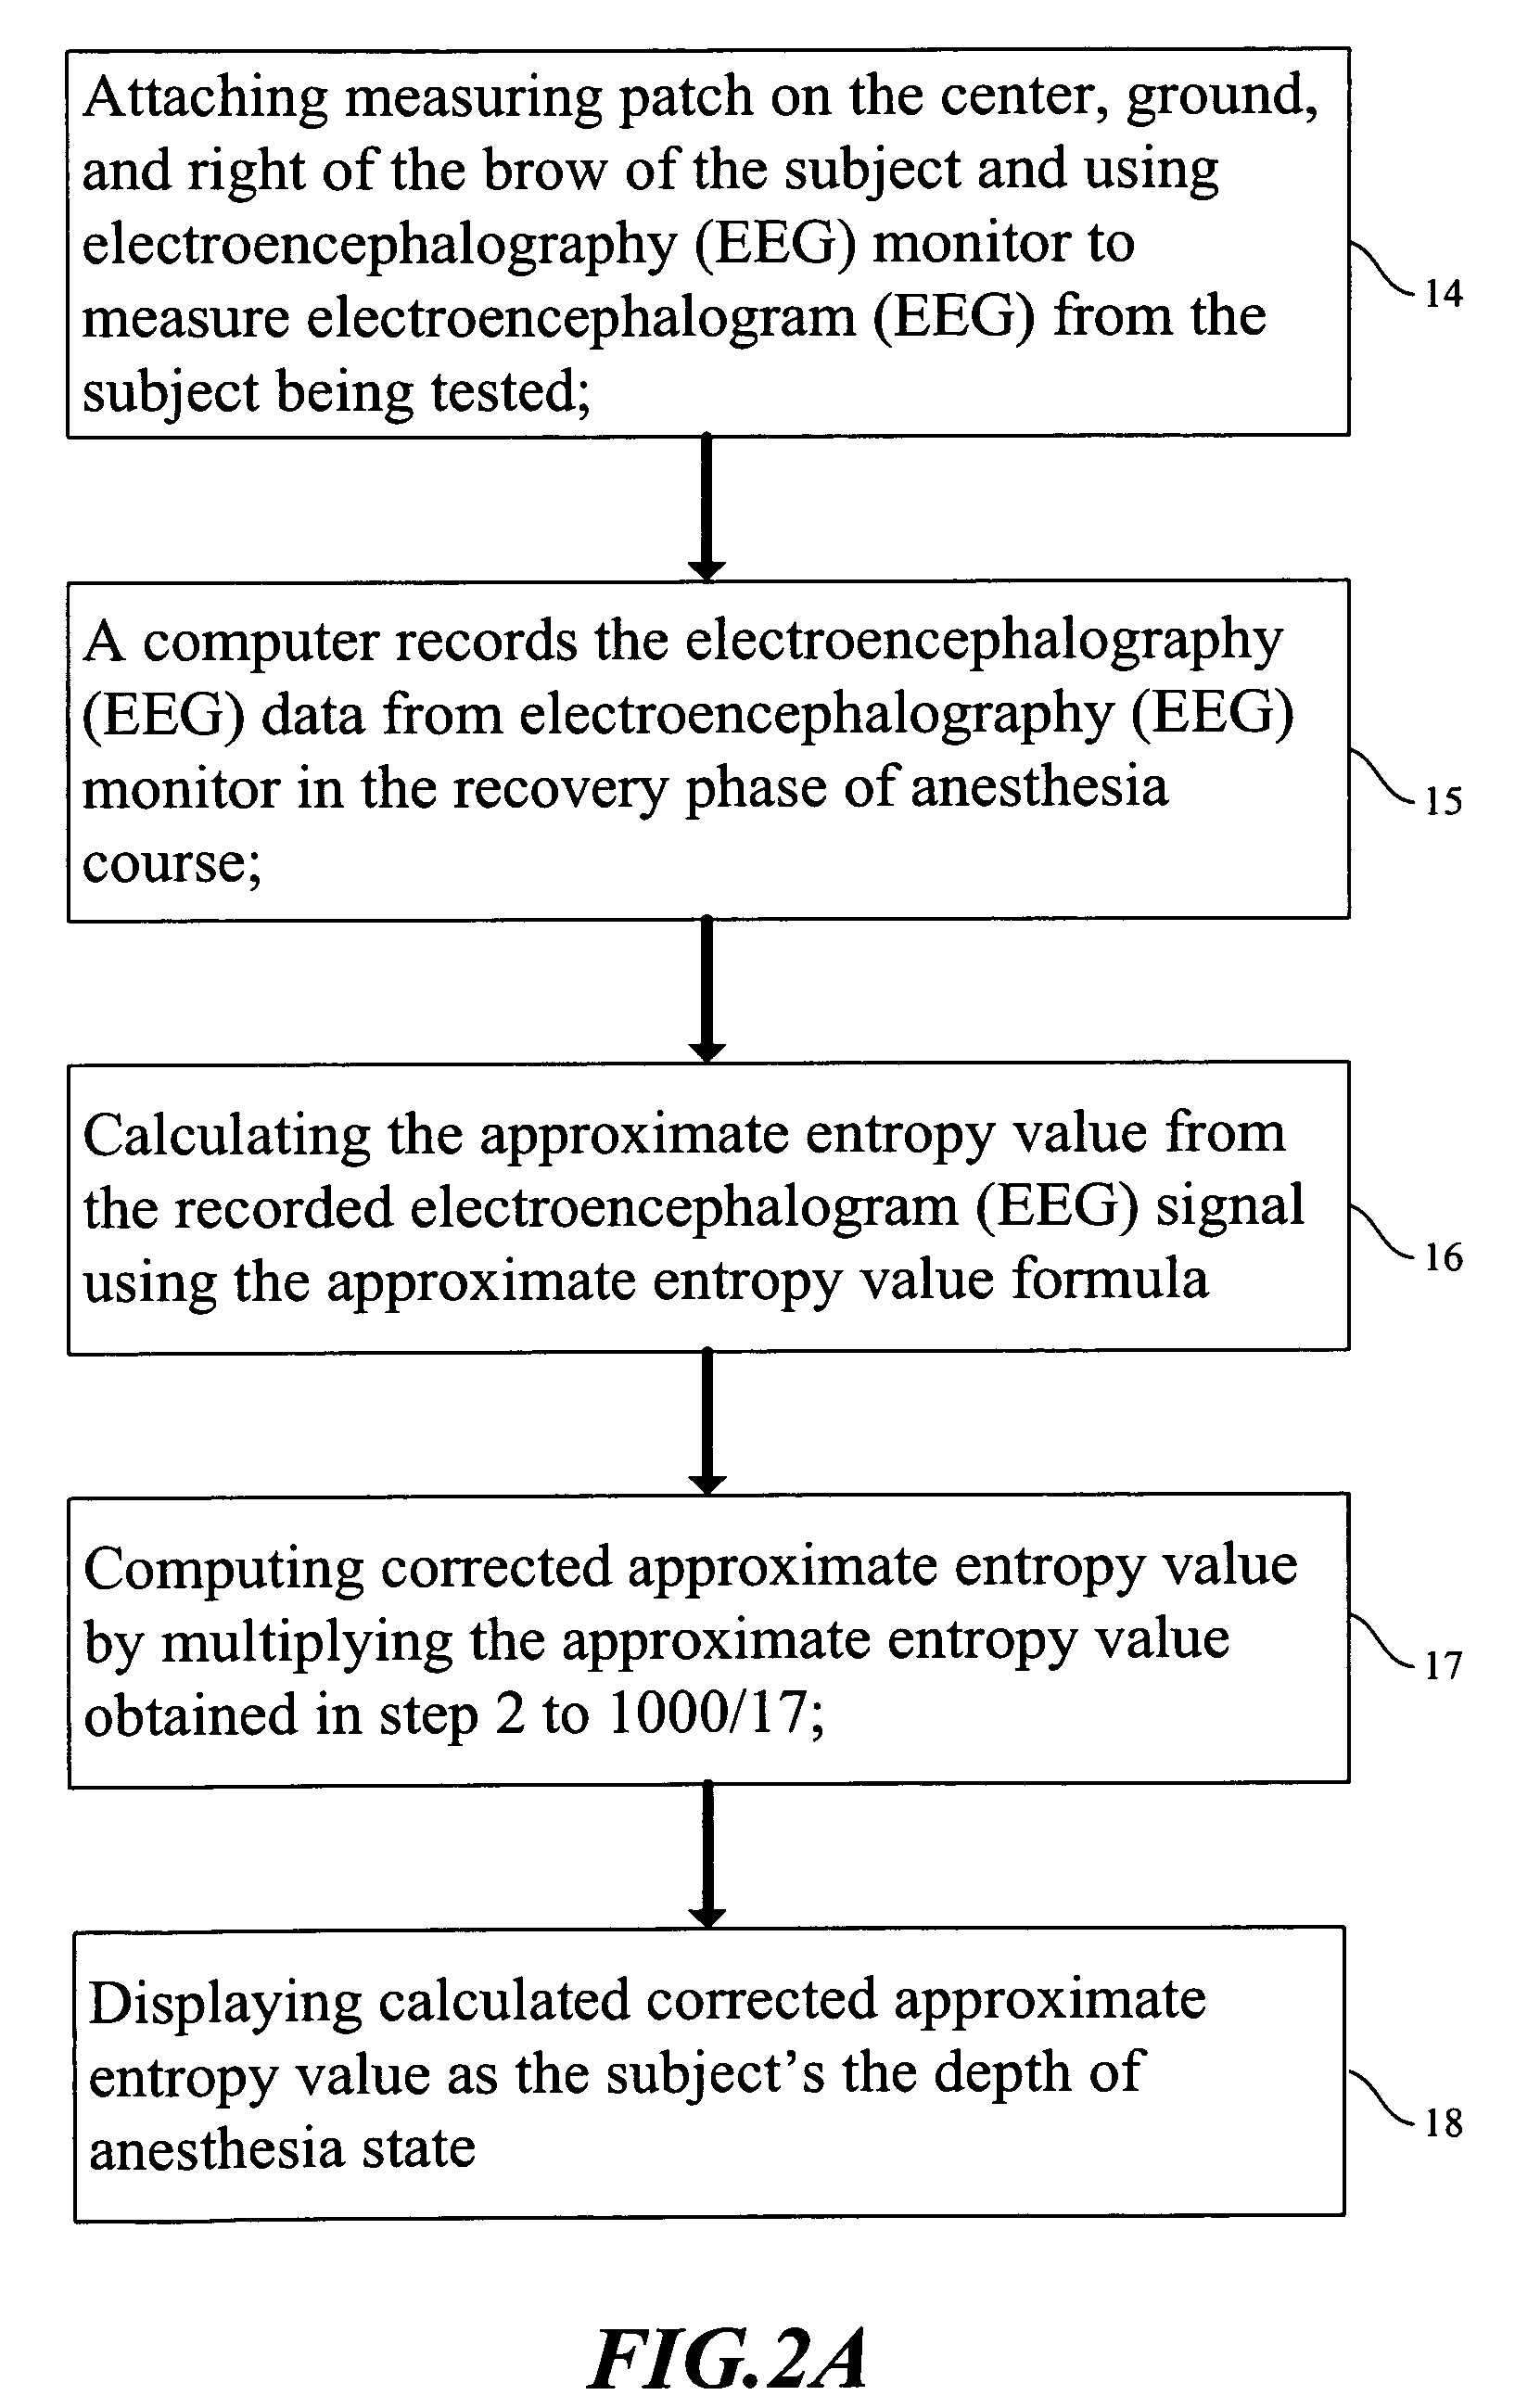 Method for monitoring the depth of anesthesia